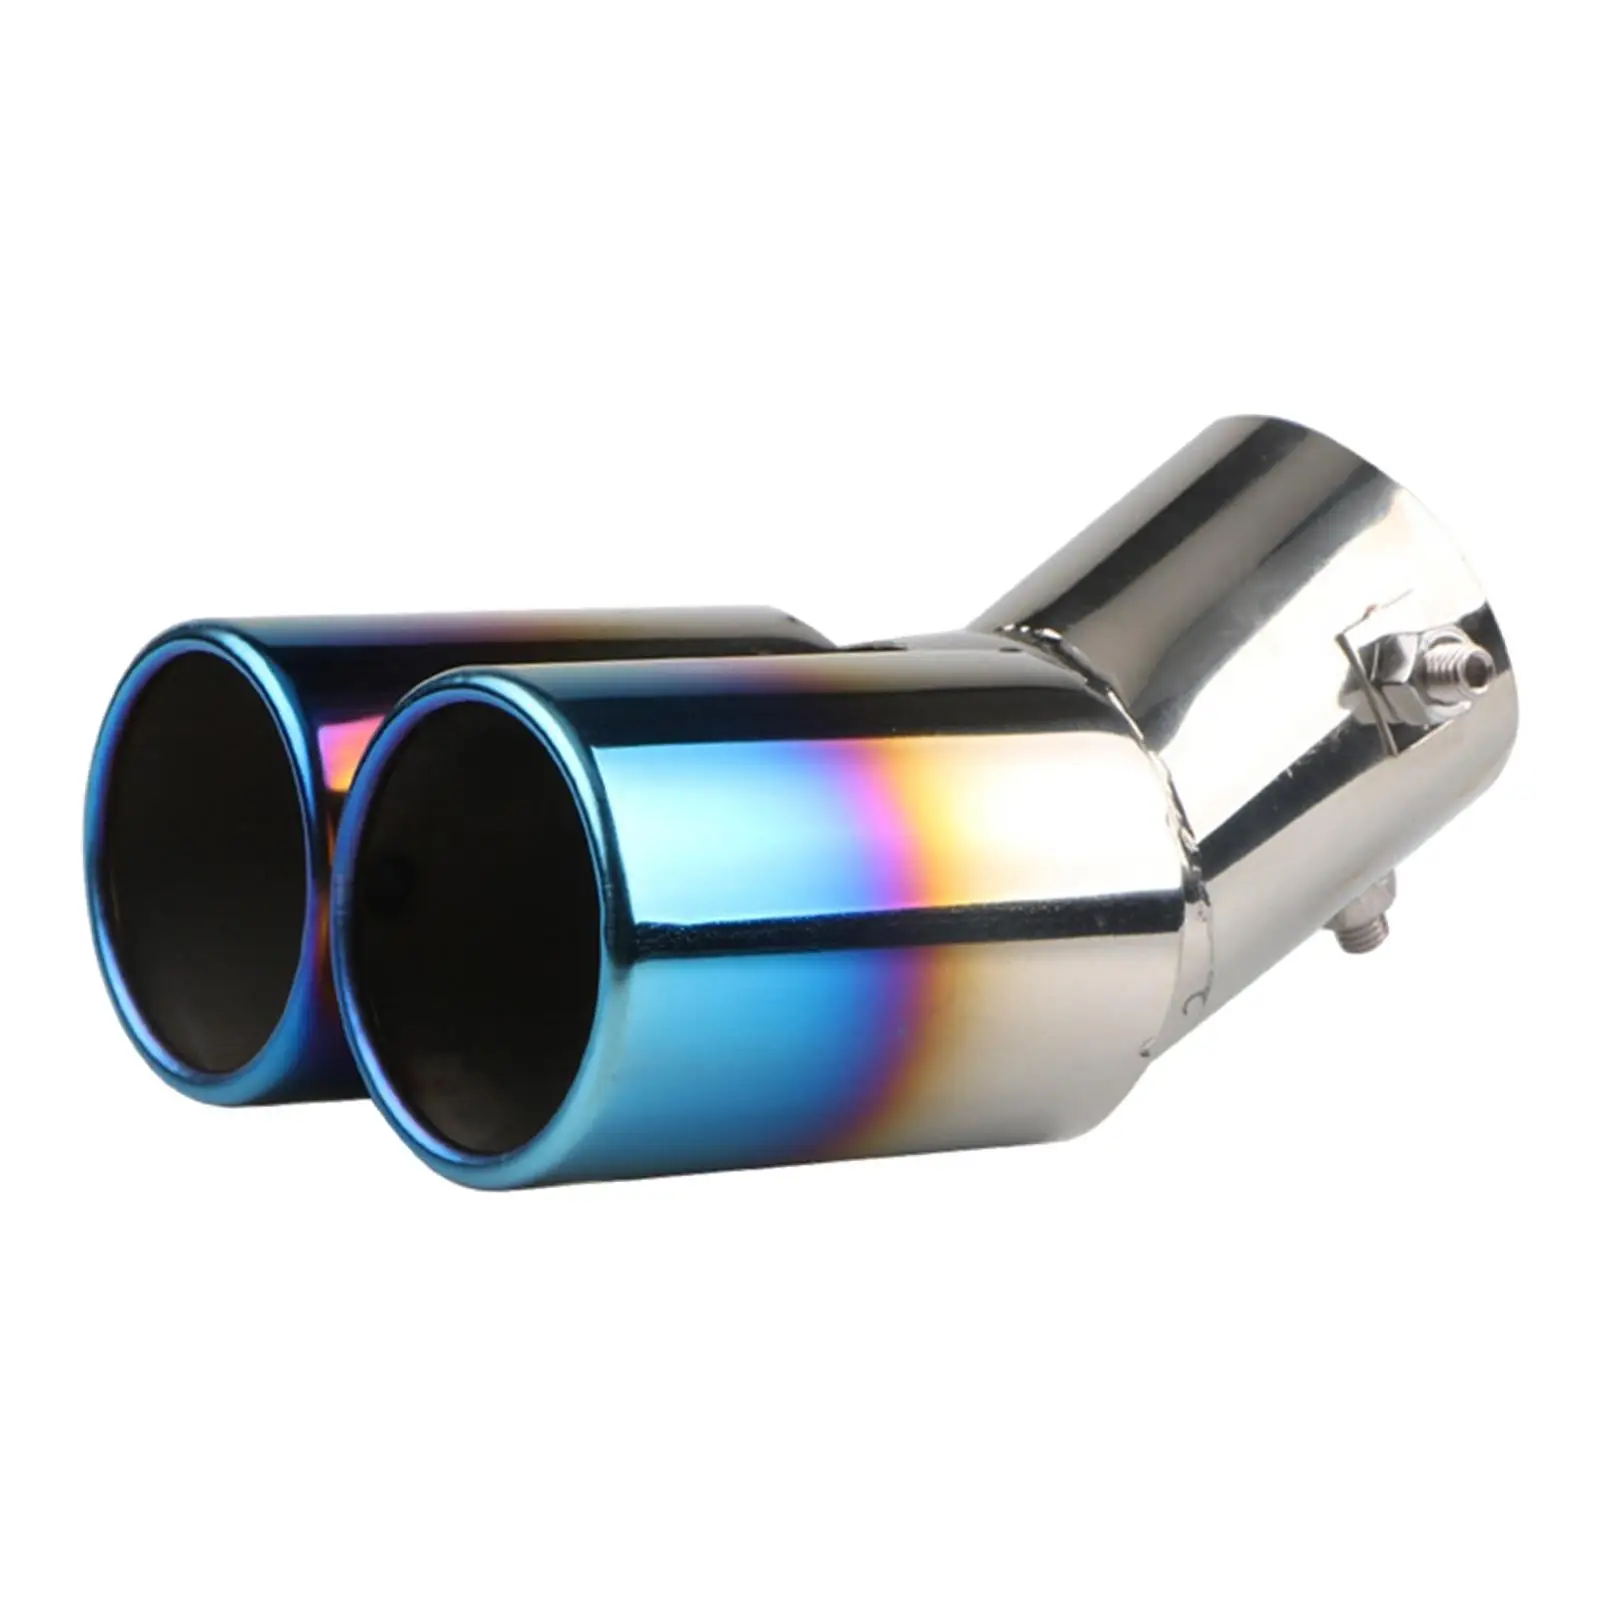 Car Dual Exhaust Tip Tail Pipe Professional Stainless Steel Premium Replace Parts Car Modification Accessory Exhaust Tail Throat